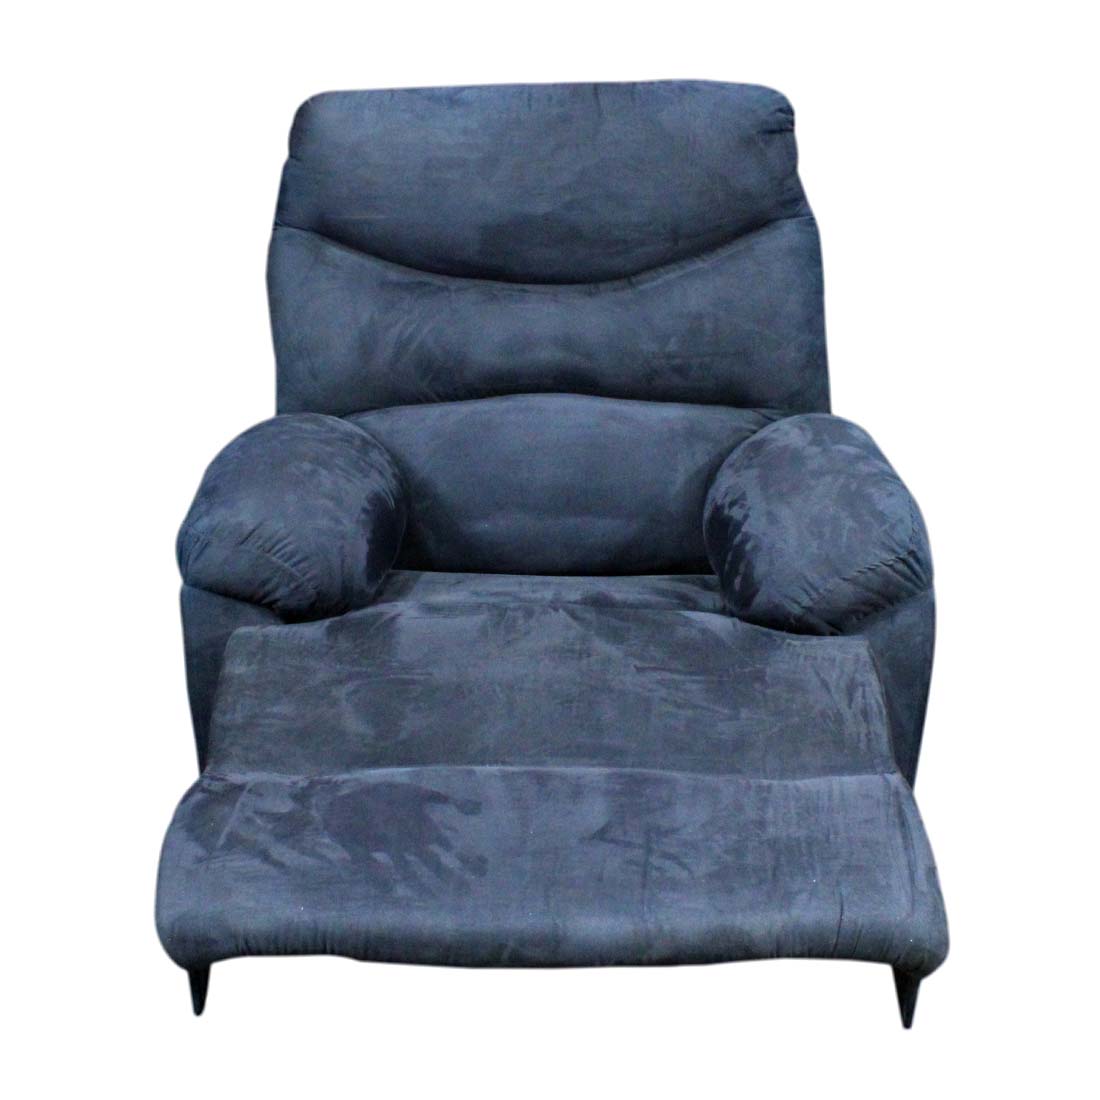 PRIMROSE Victoria 3R Rocking And Revolving Recliner With Suede Fabric - Navy Blue